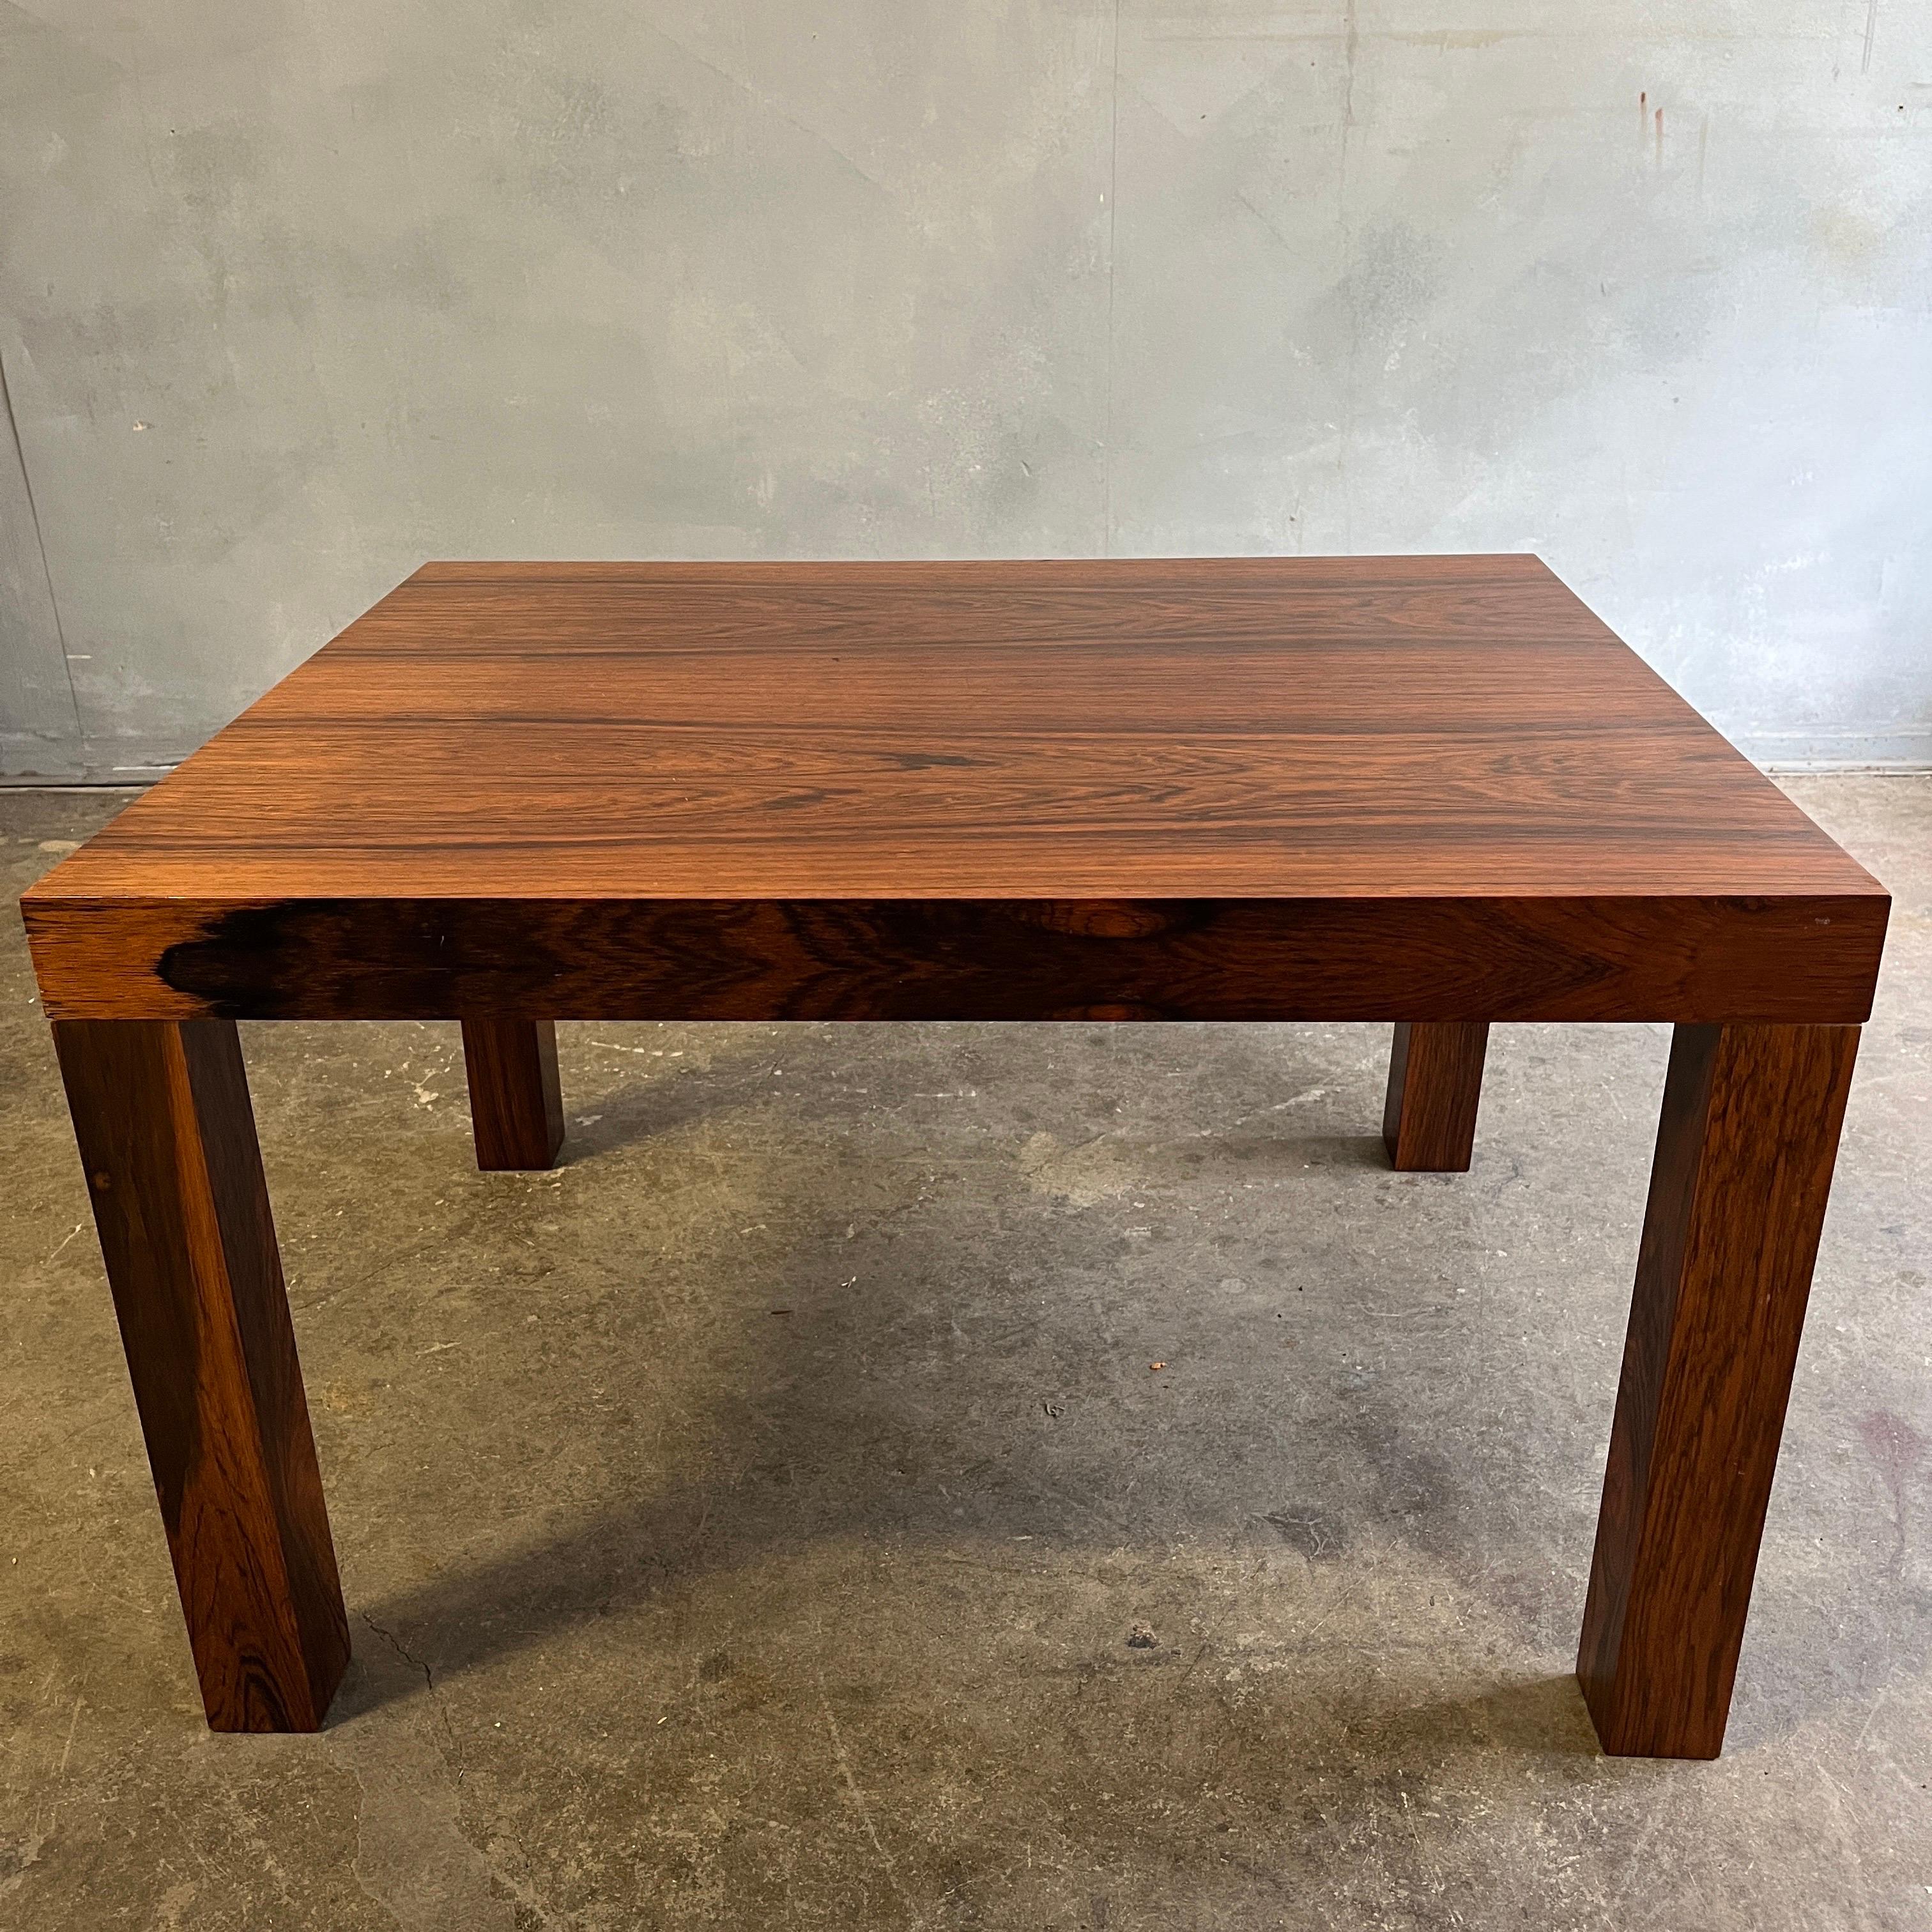 For your consideration is this lovely parsons table that would make the perfect elegant apartment size coffee table or standard size end table. Made from Brazilian Rosewood with highly figured details. Dyrlund- Label is missing


Parcel shipping